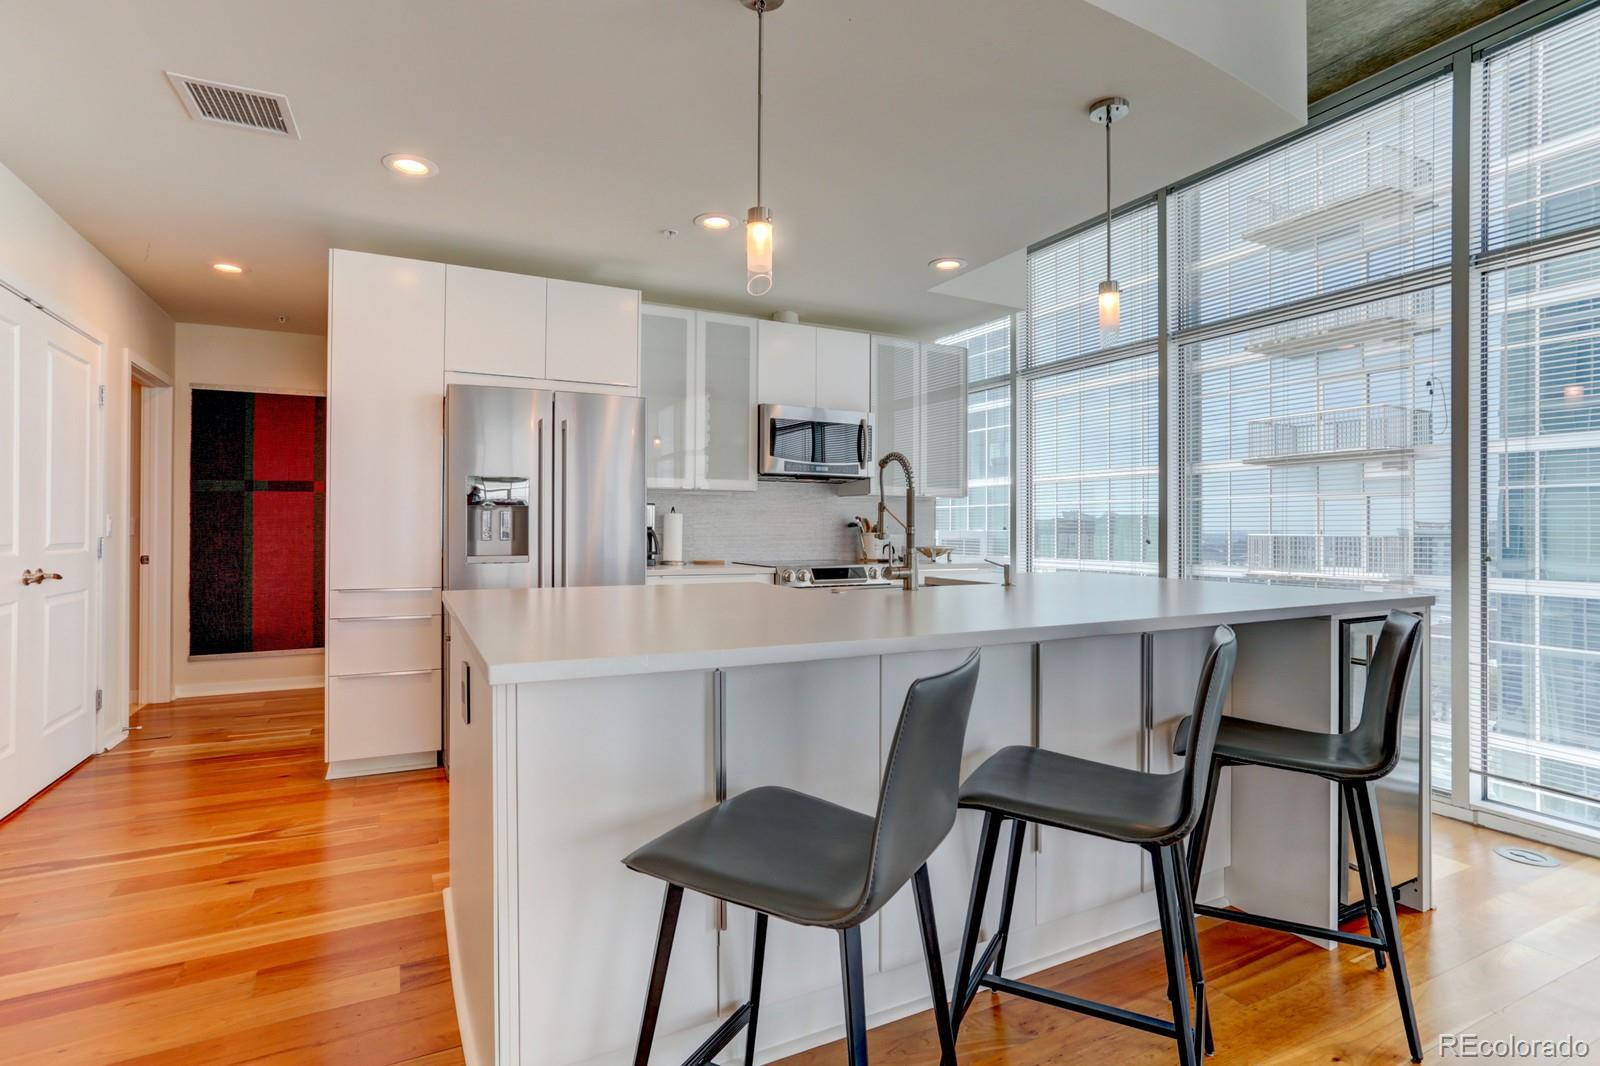 a kitchen with stainless steel appliances kitchen island granite countertop a dining table chairs and sink